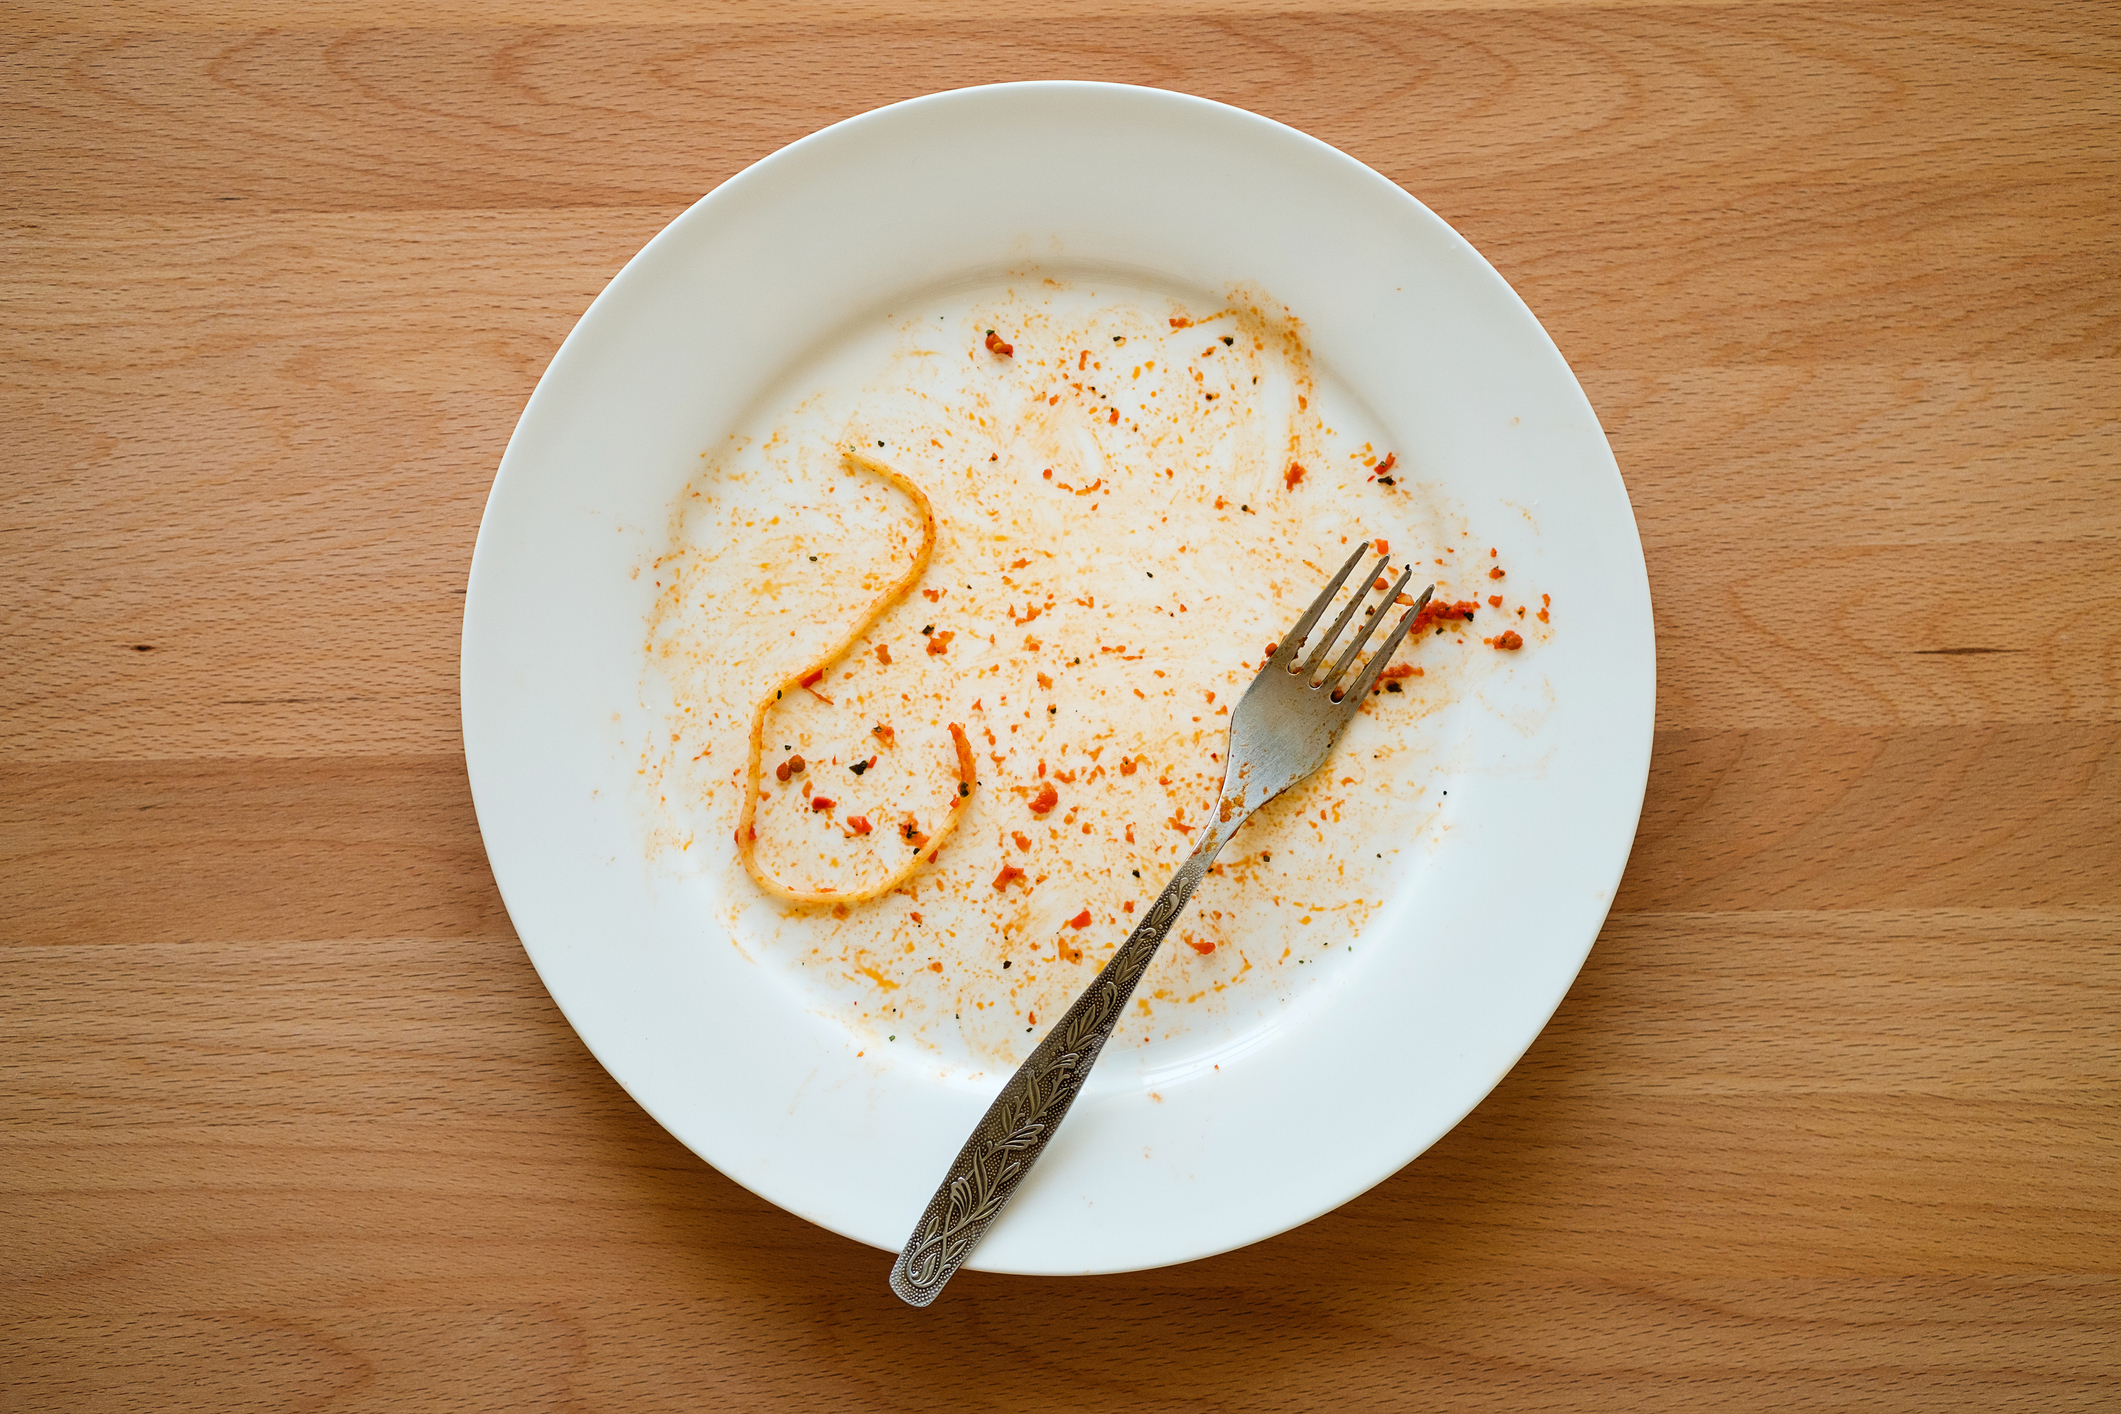 An empty plate with remnants of a red sauce and spaghetti